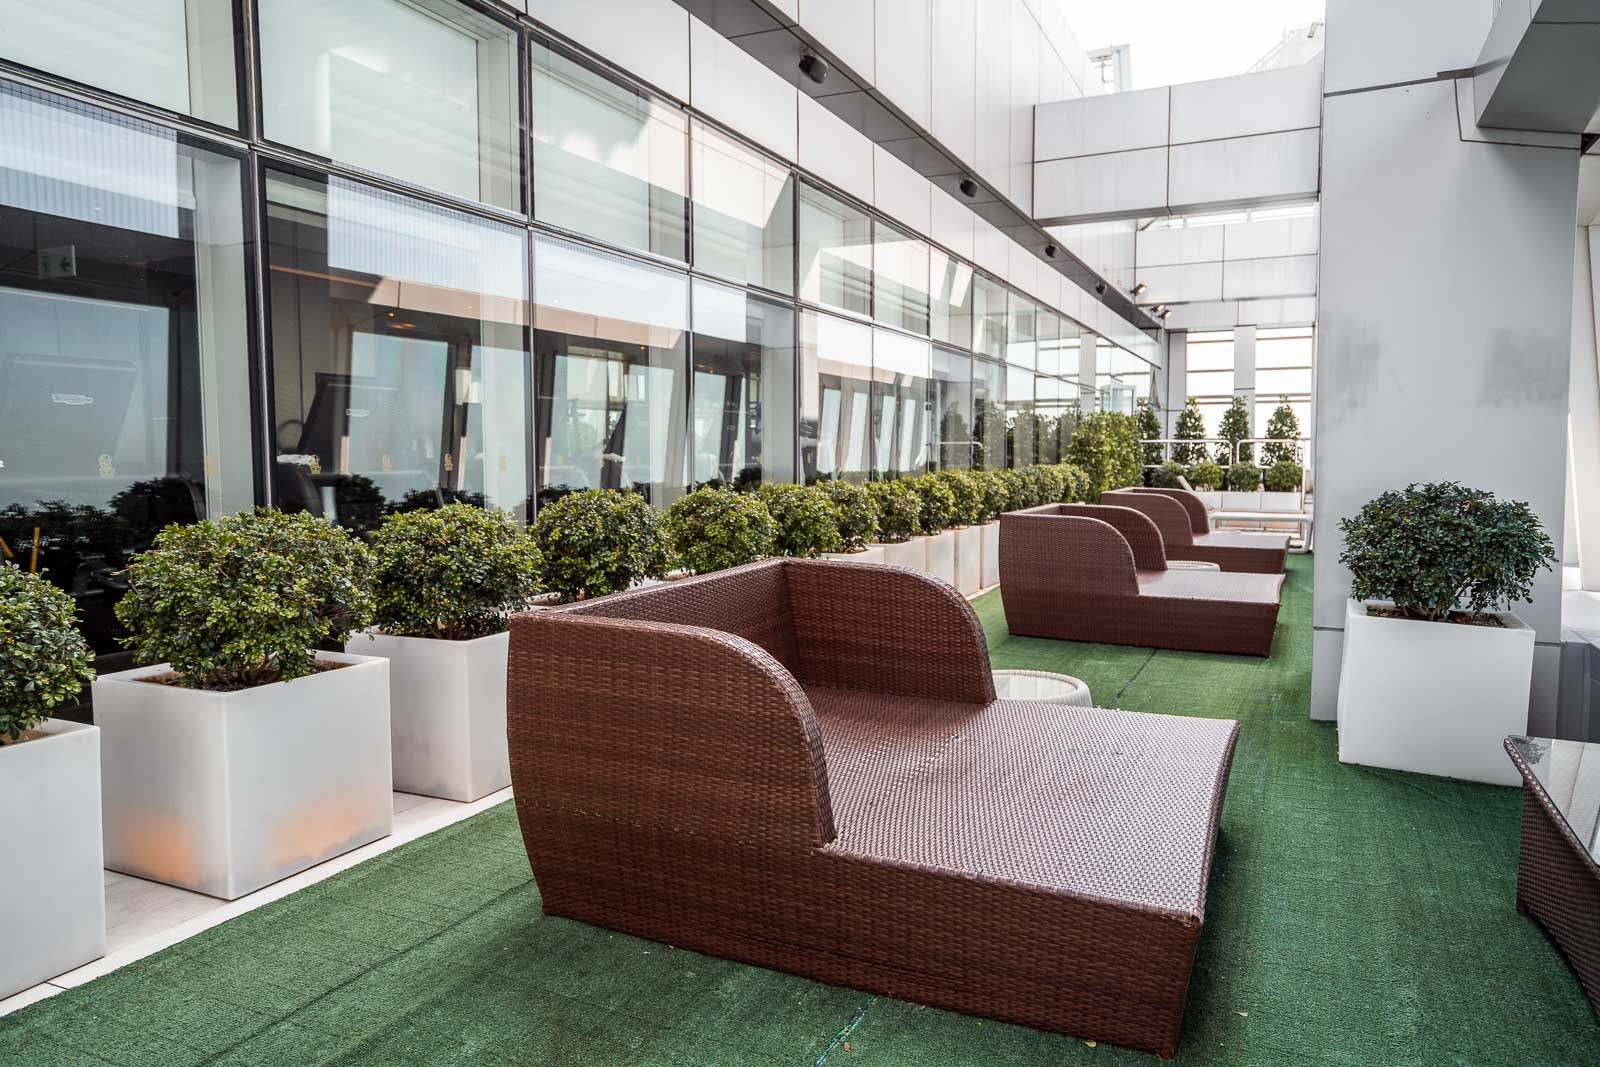 Outdoor terrace on the 118th floor with chairs and green plants